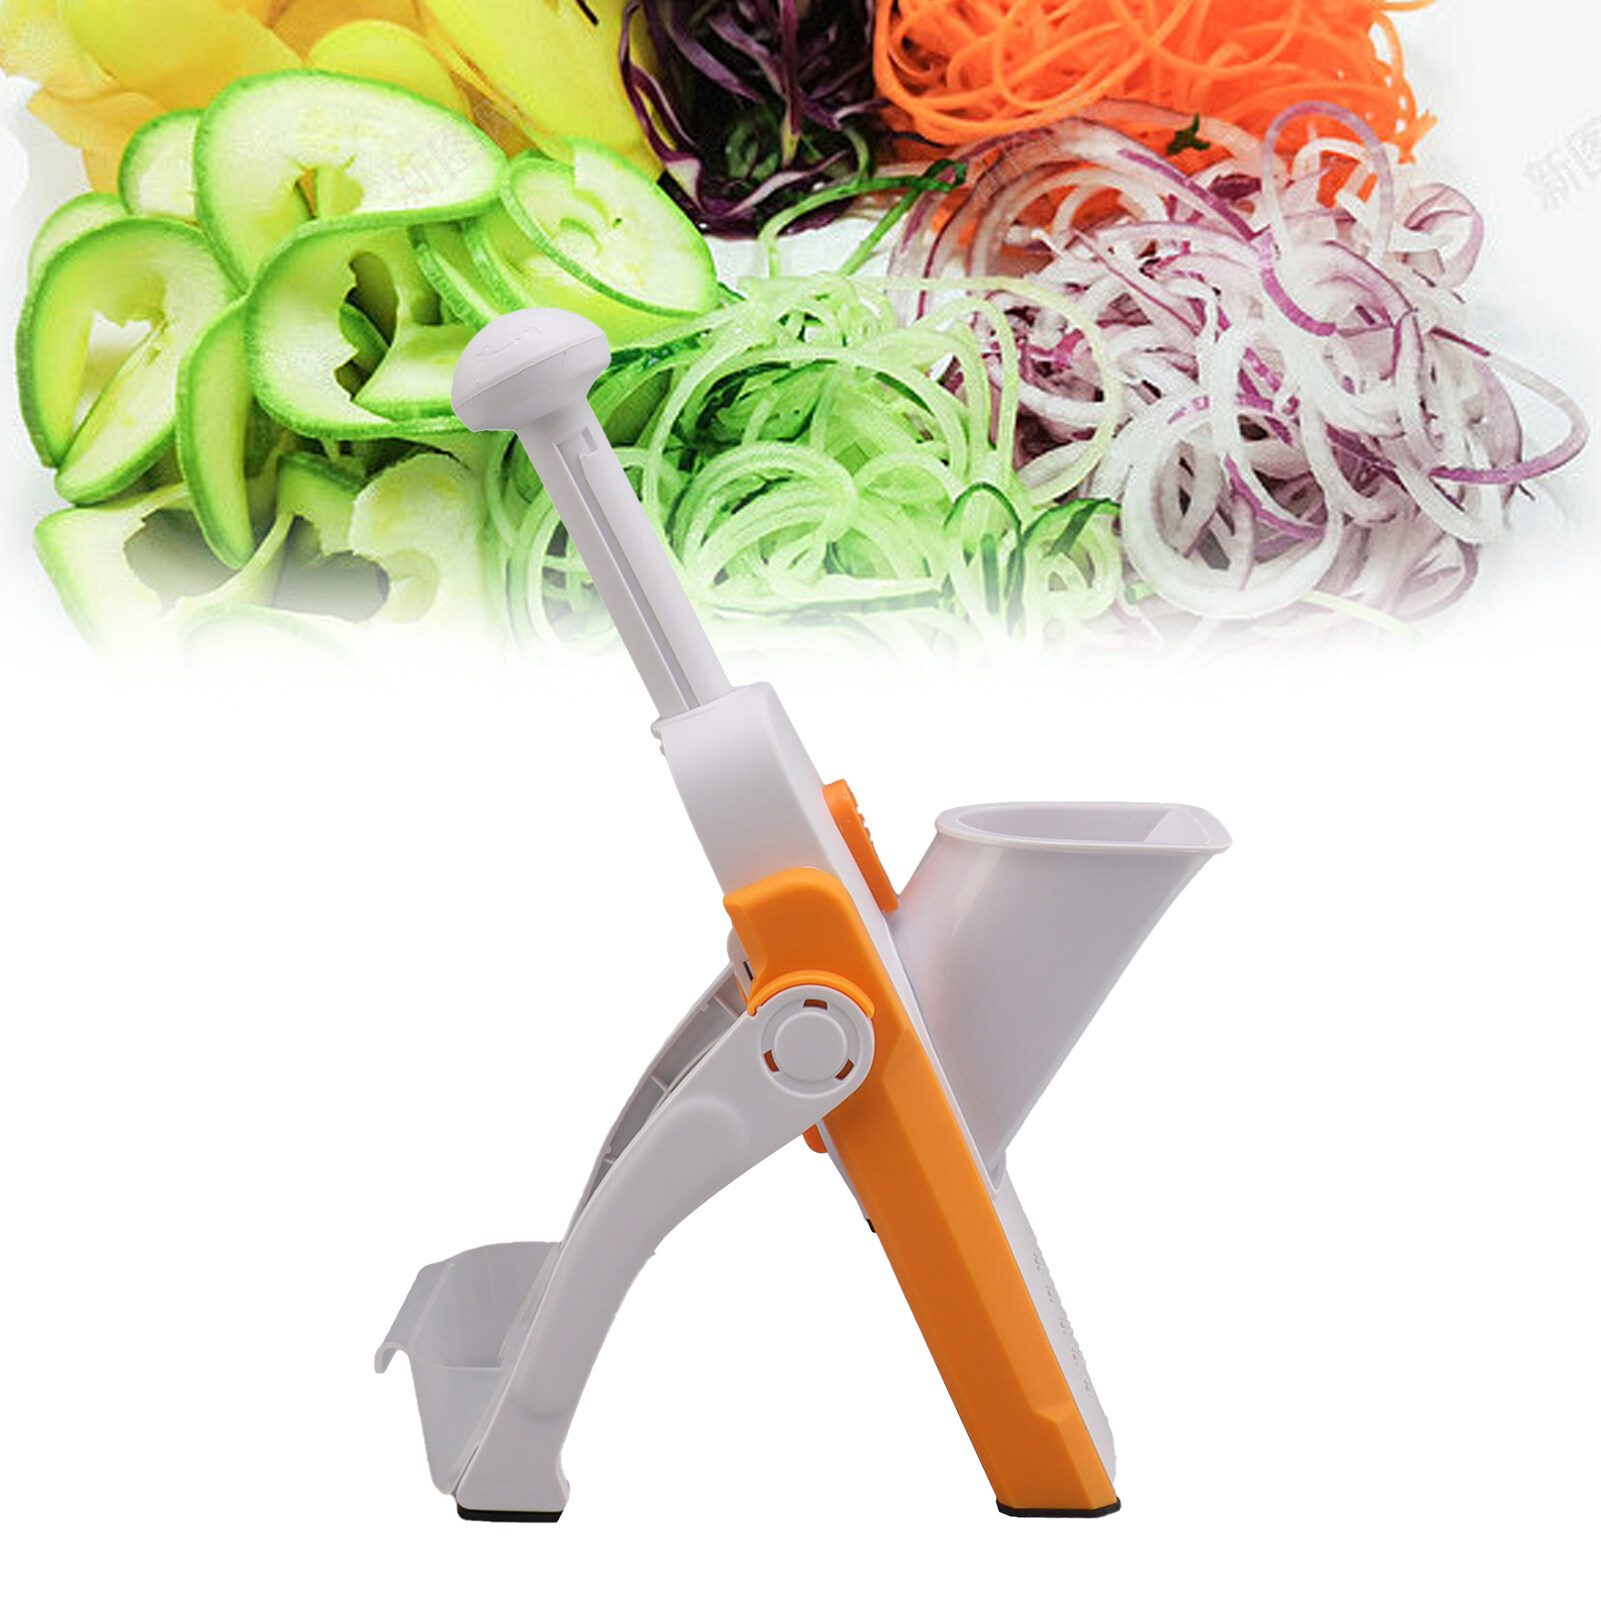 Upright Vegetable Cutter Vegetable Dicer 4 in 1 with Brush for Kitchen Fast Meal Prep